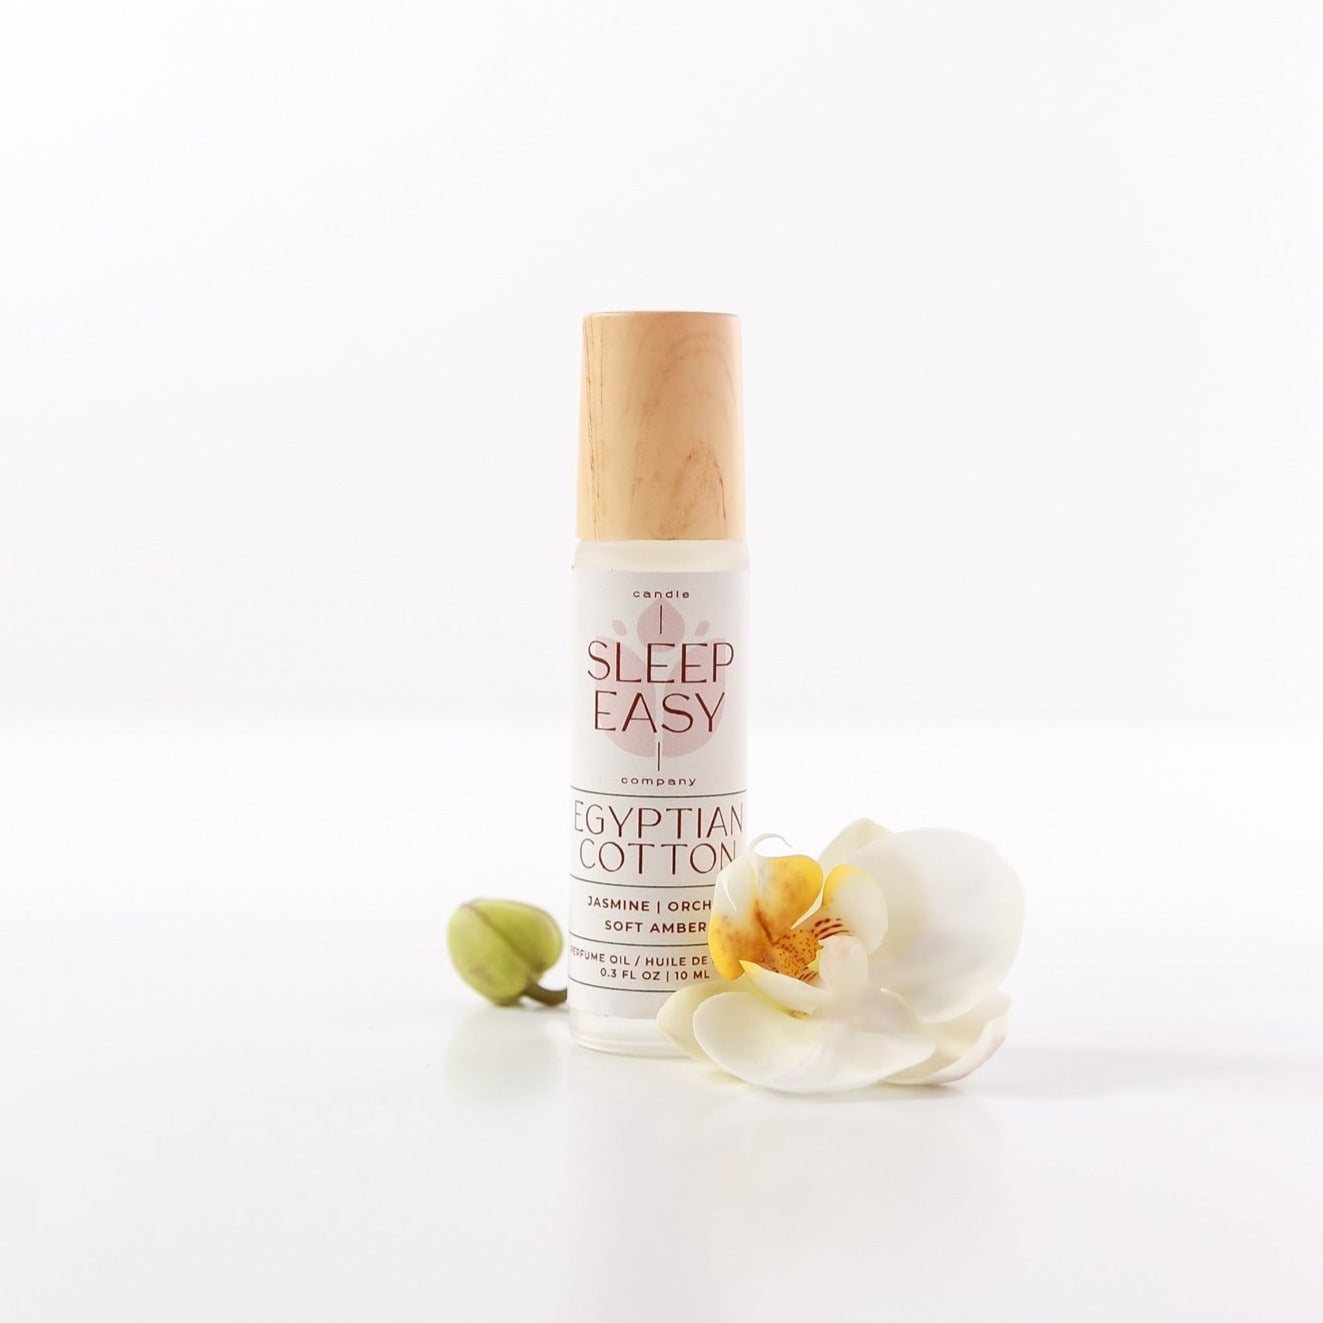 Egyptian Cotton, Roll on perfume, natural perfume oil, perfume oil, travel perfume, perfume